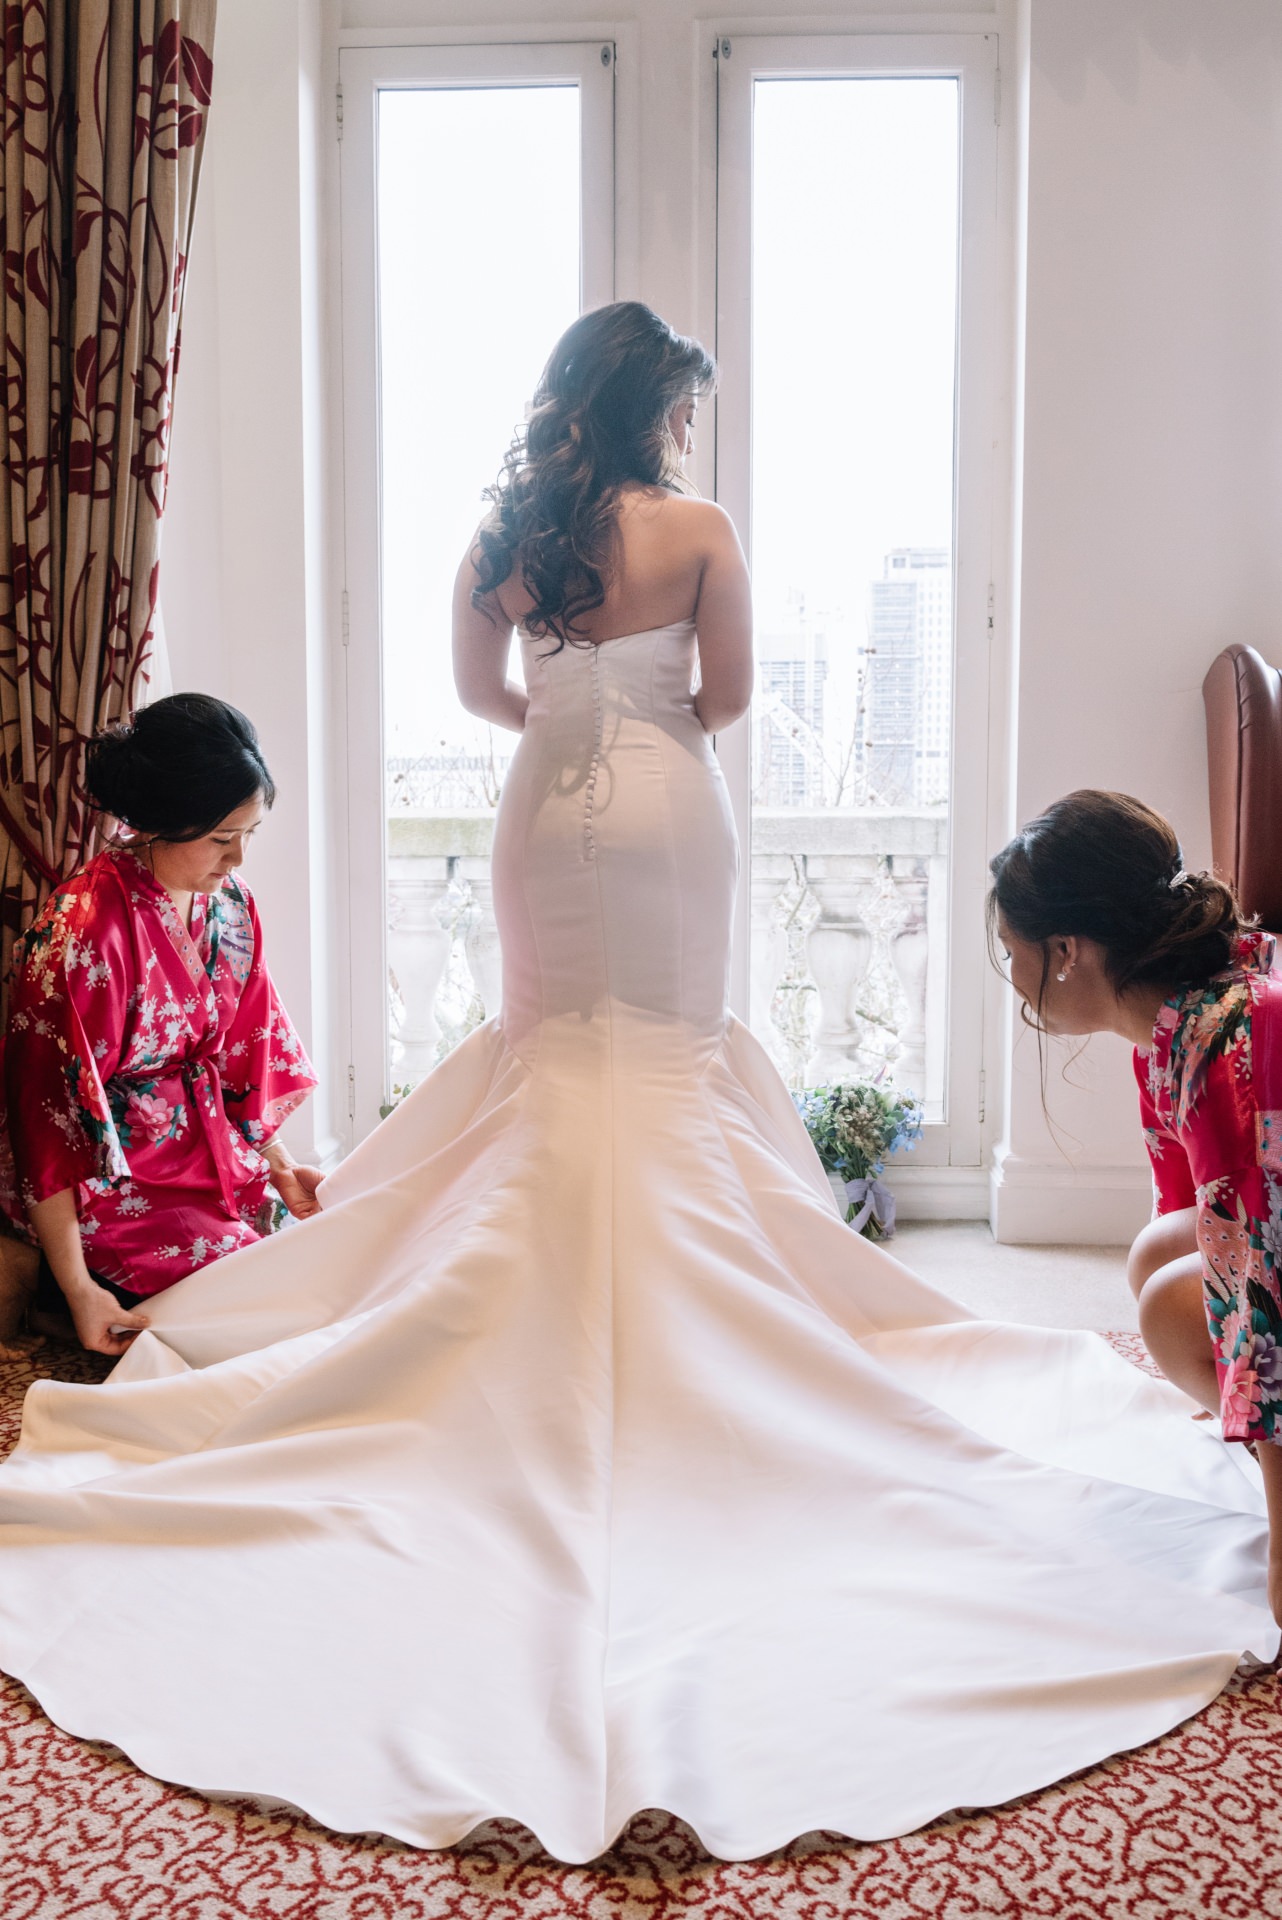 One whitehall place wedding photography